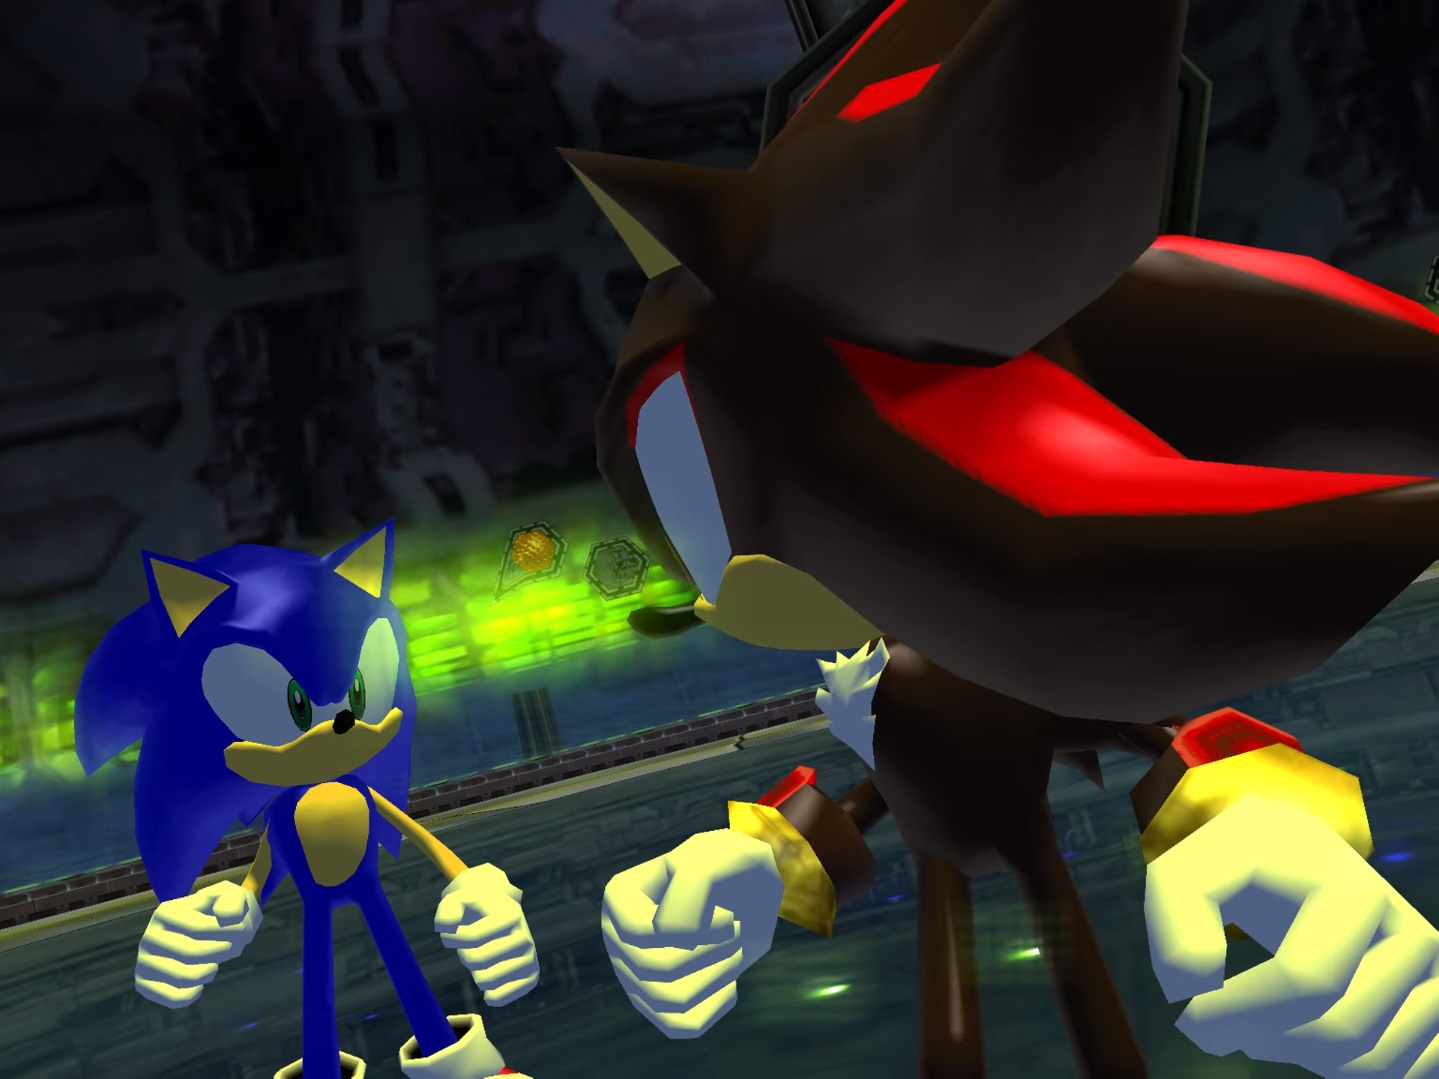 Since I'm the fusion of Shadow and the fake hedgehog, I guess that